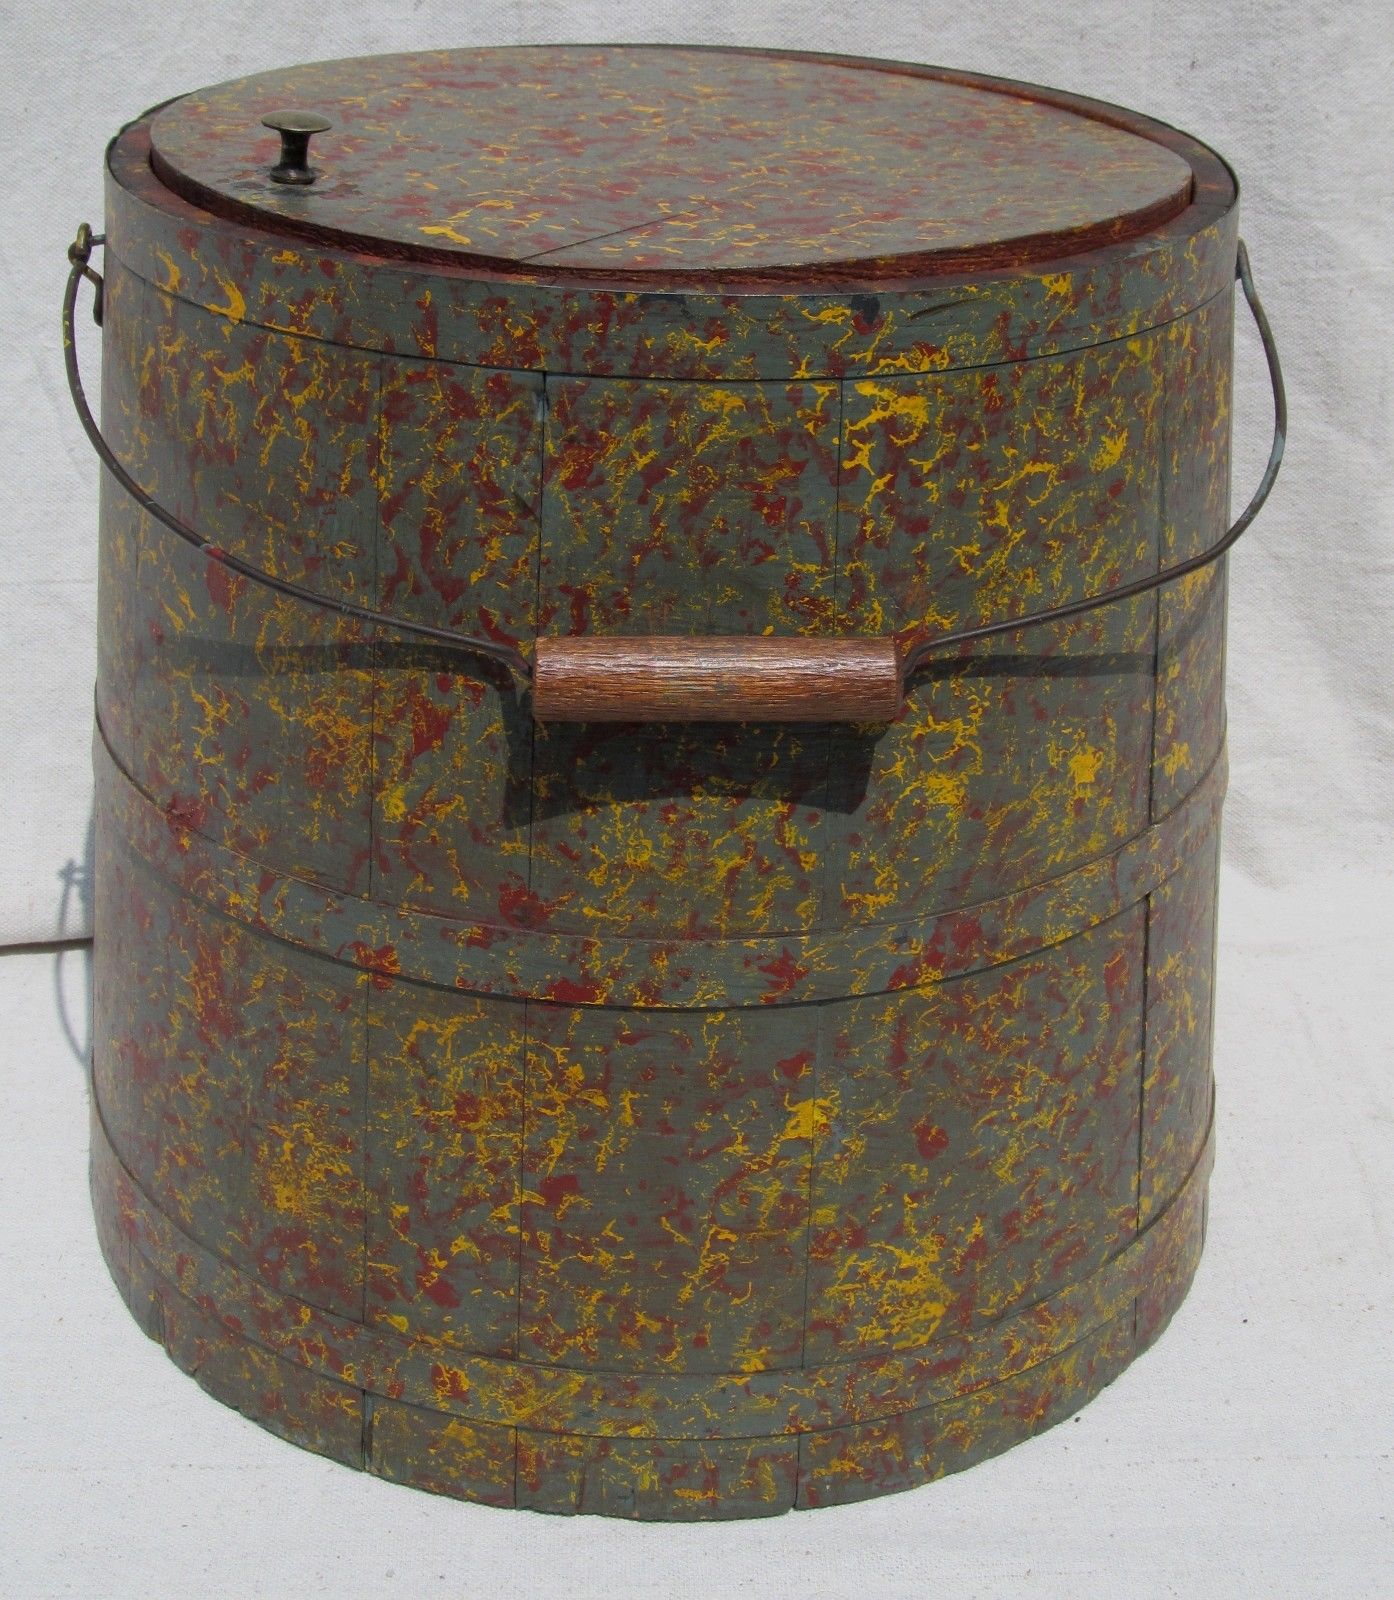 FABULOUS 19TH CENTURY POLY CHROME SPONGE PAINT DECORATED WOODEN COVERED BUCKET